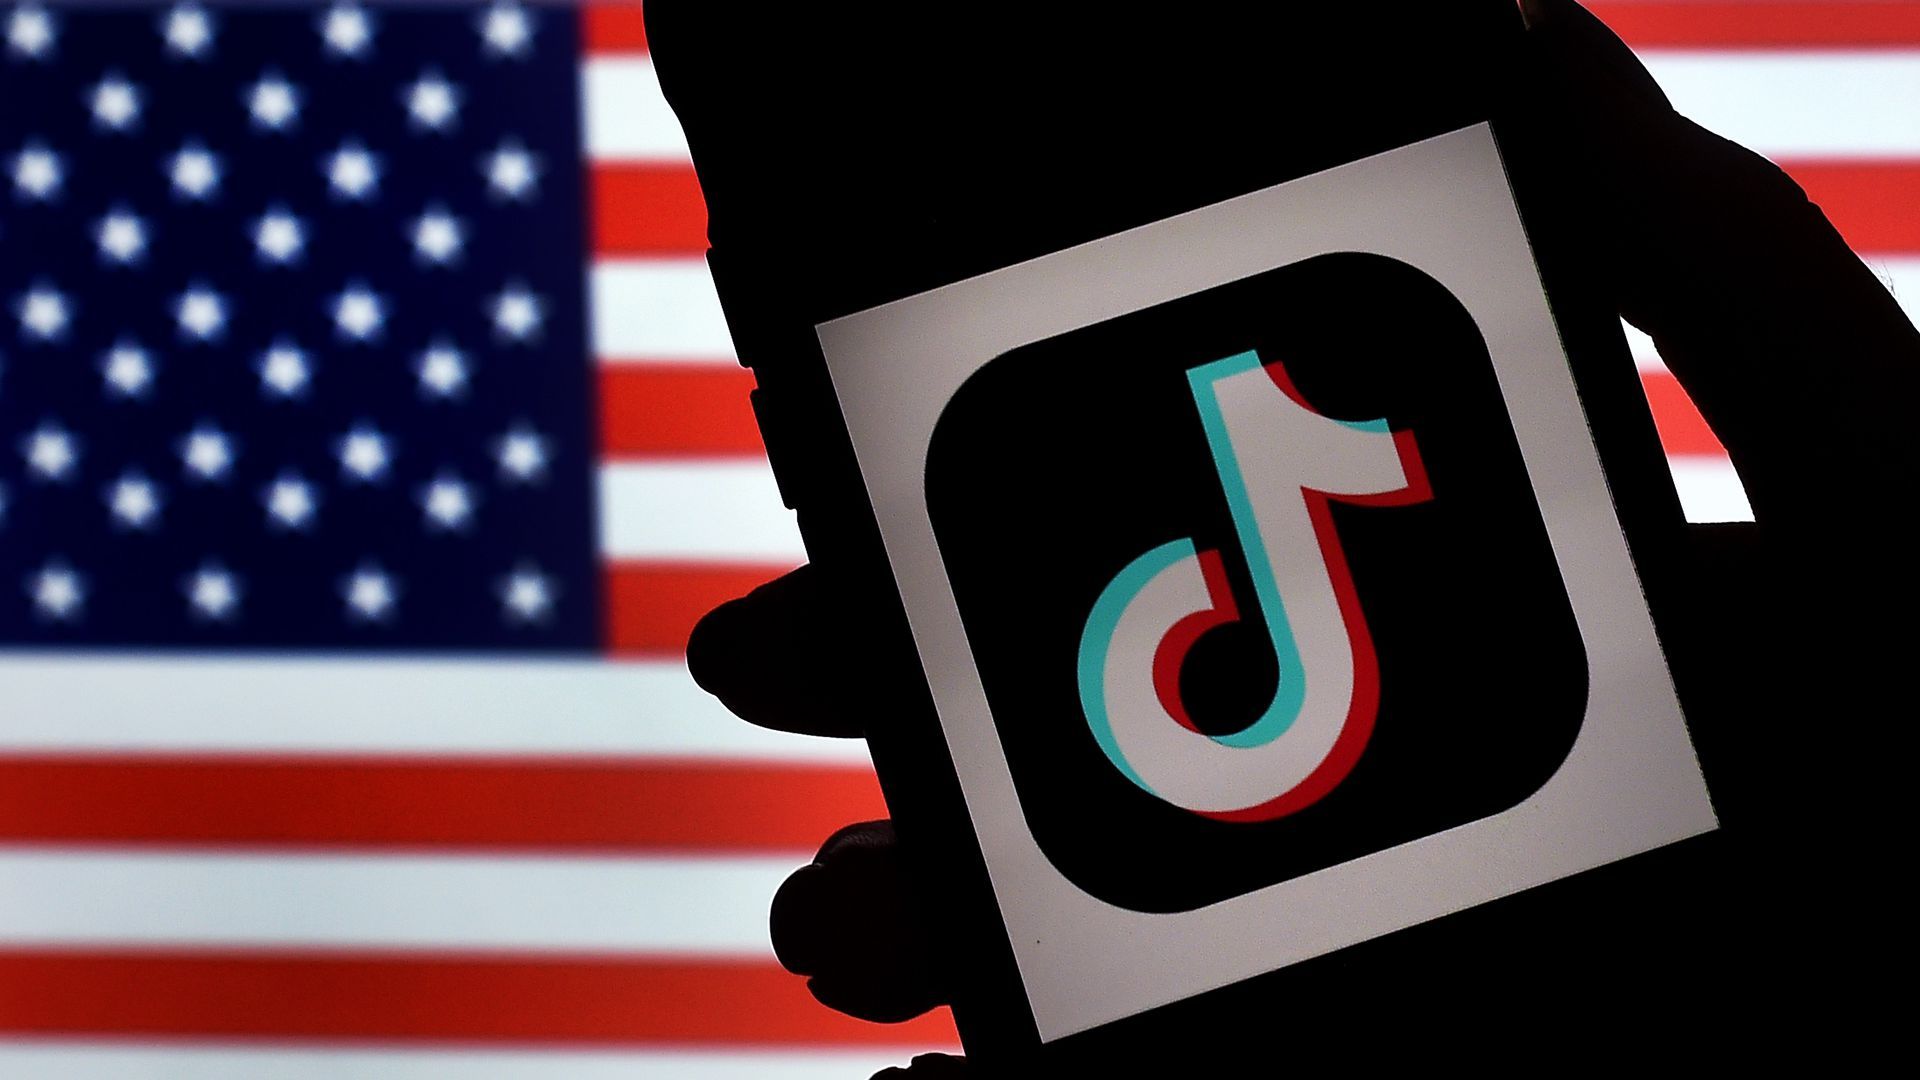 An illustration shows a smartphone bearing a TikTok logo set against the backdrop of an American flag.